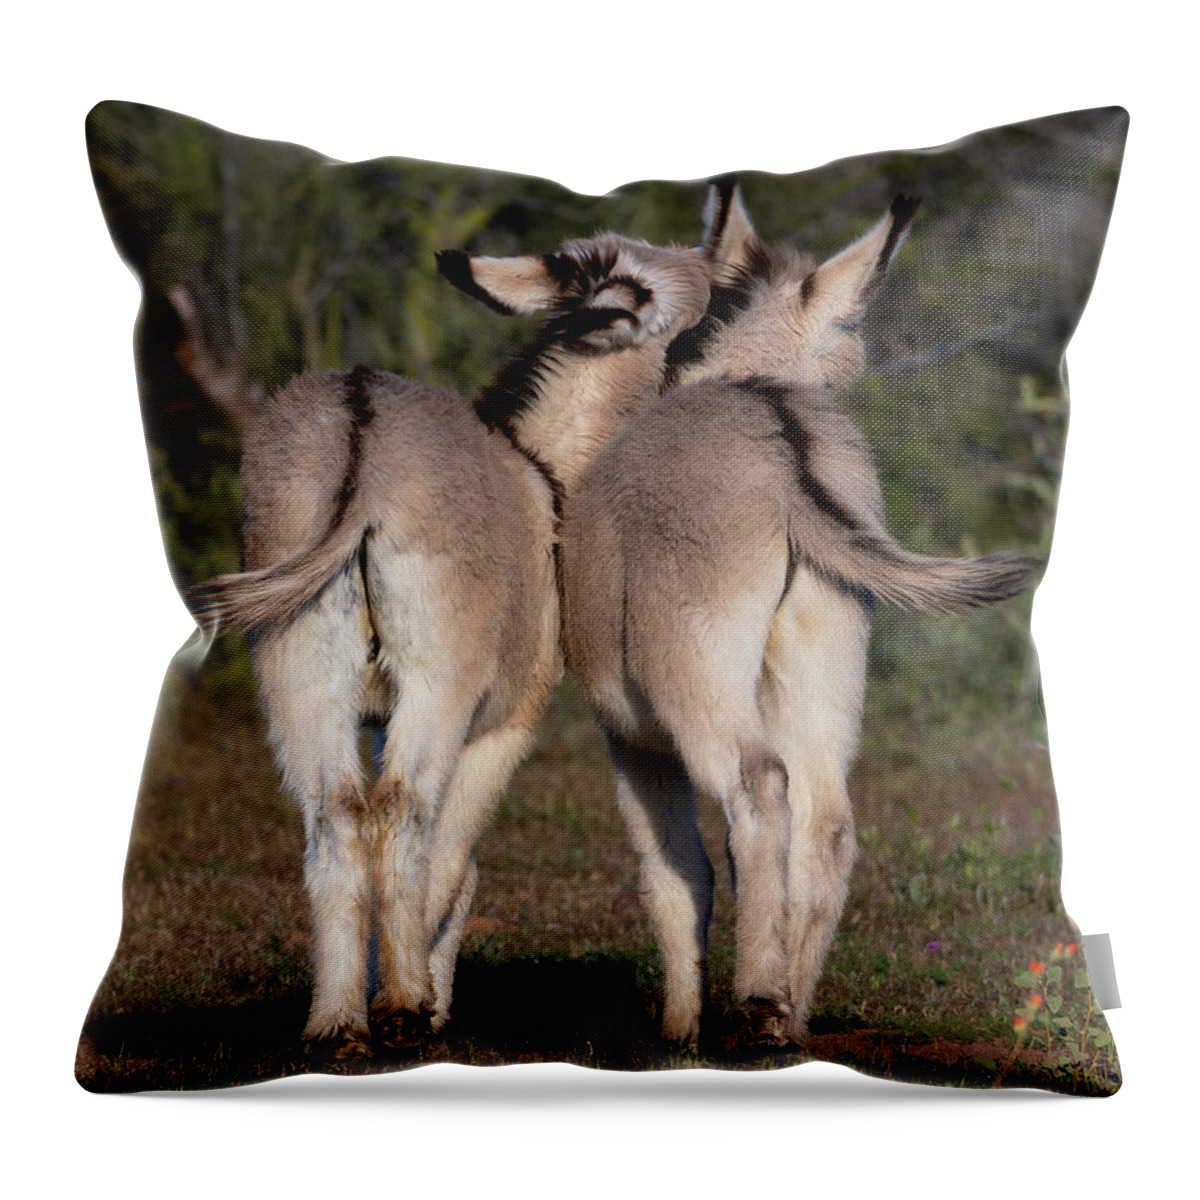 Wild Burros Throw Pillow featuring the photograph Baby Burro Butts by Mary Hone